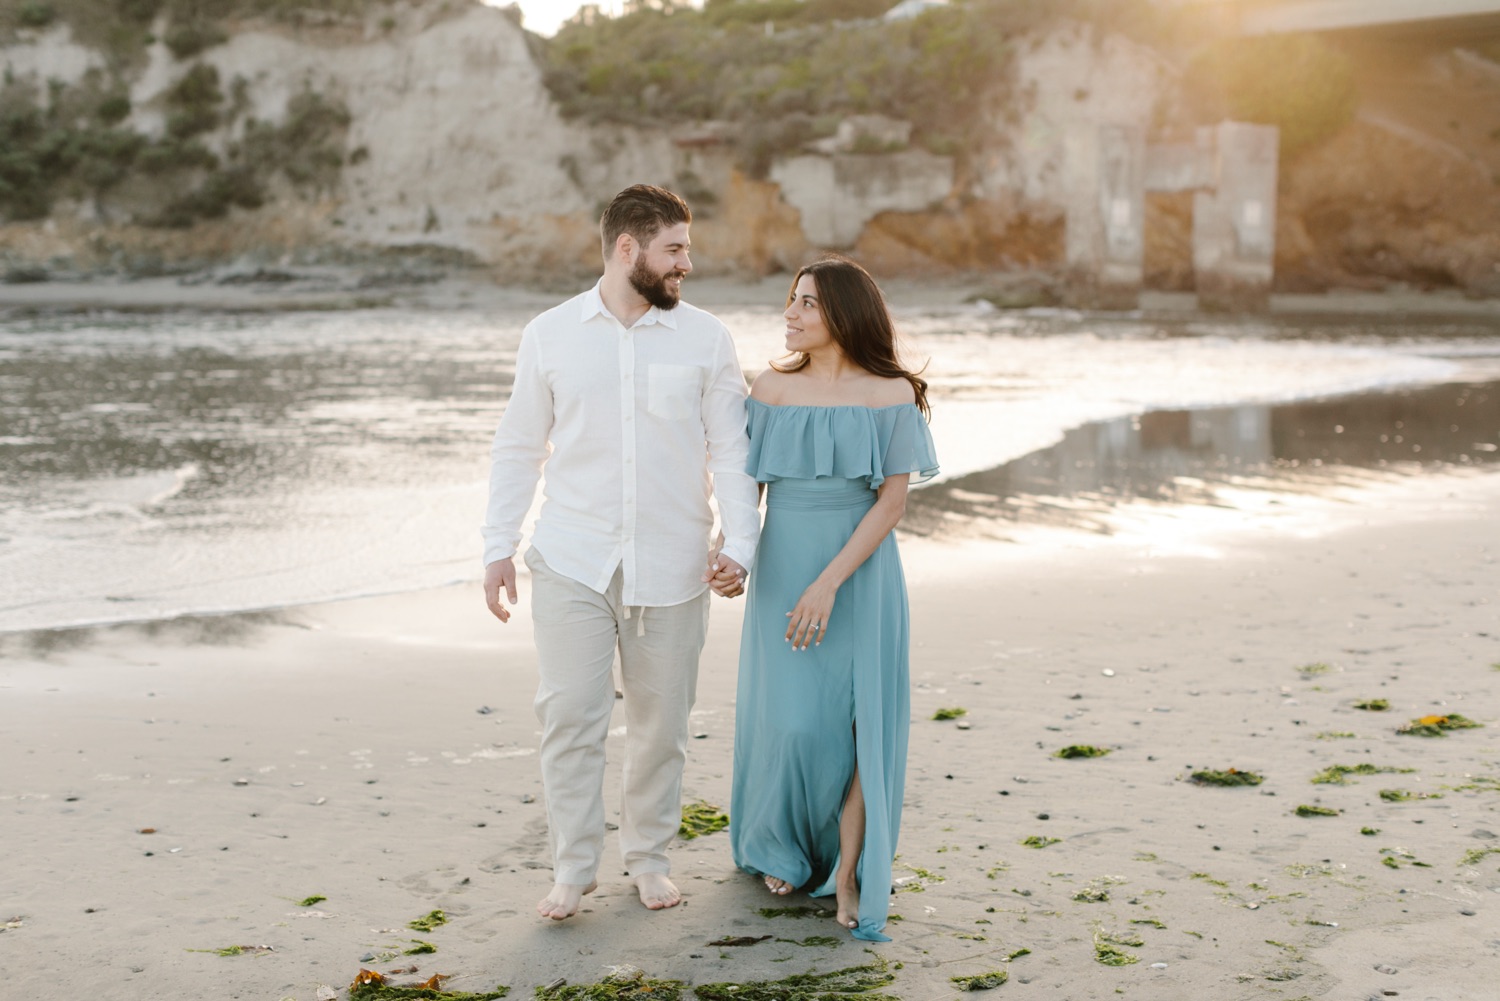 couples walking on the beach in Avila california for their engagement session